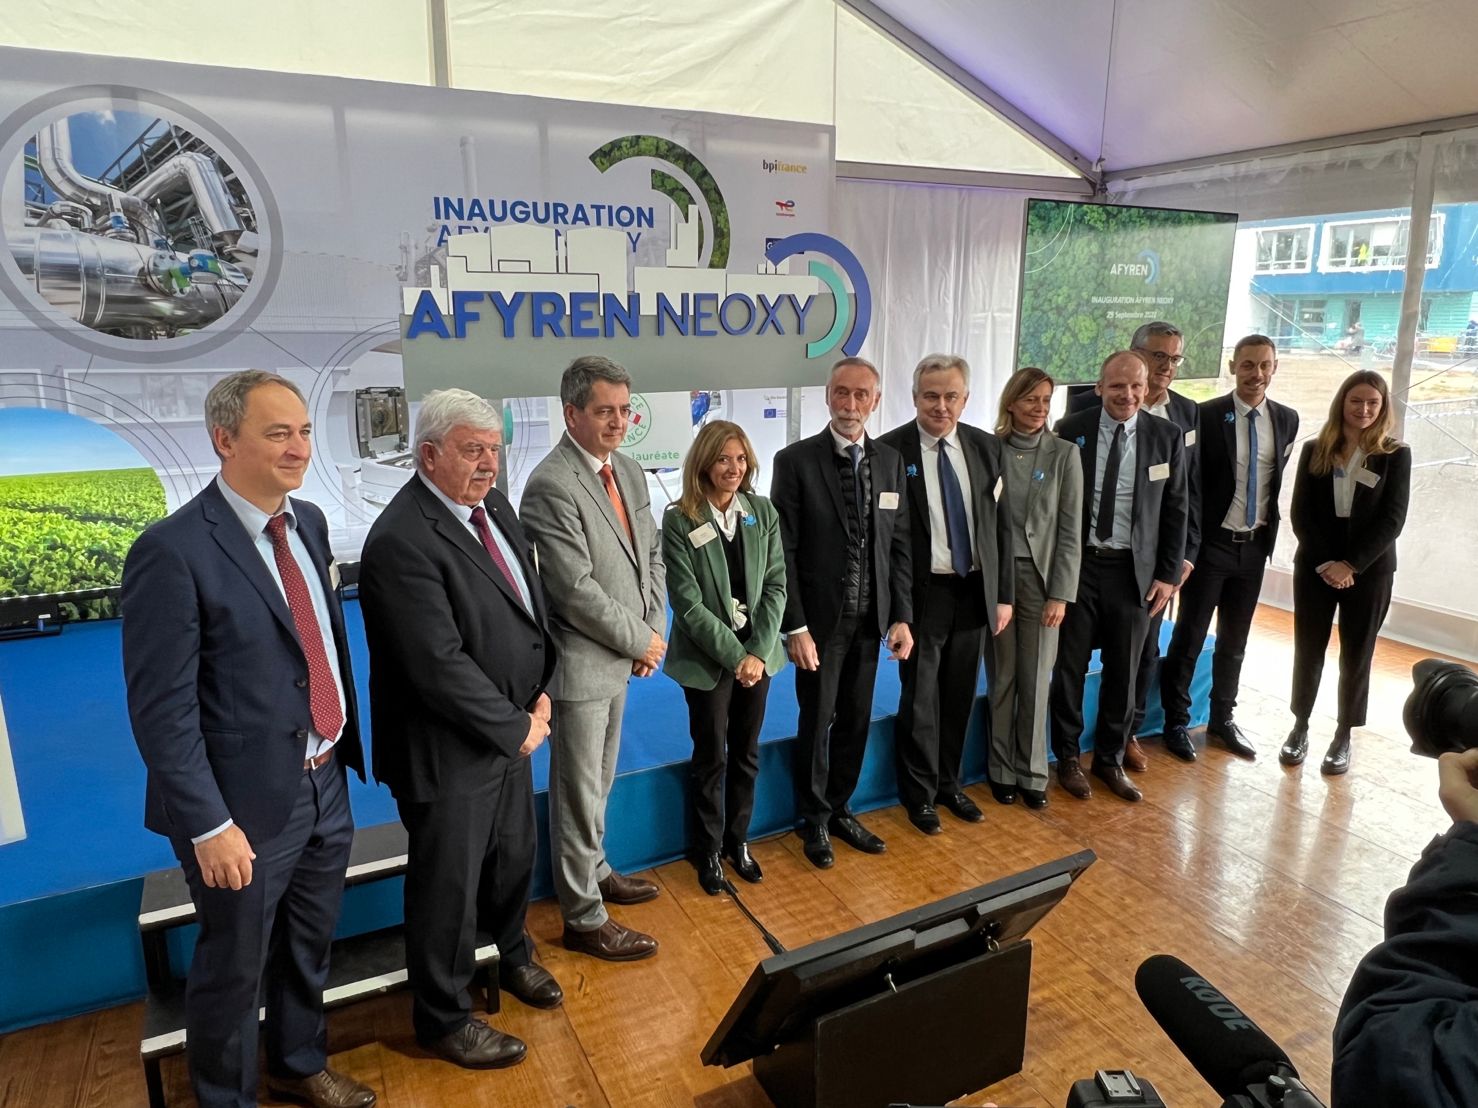 Official Opening of AFYREN NEOXY Plant: A Major Step in the AFTER-BIOCHEM Project